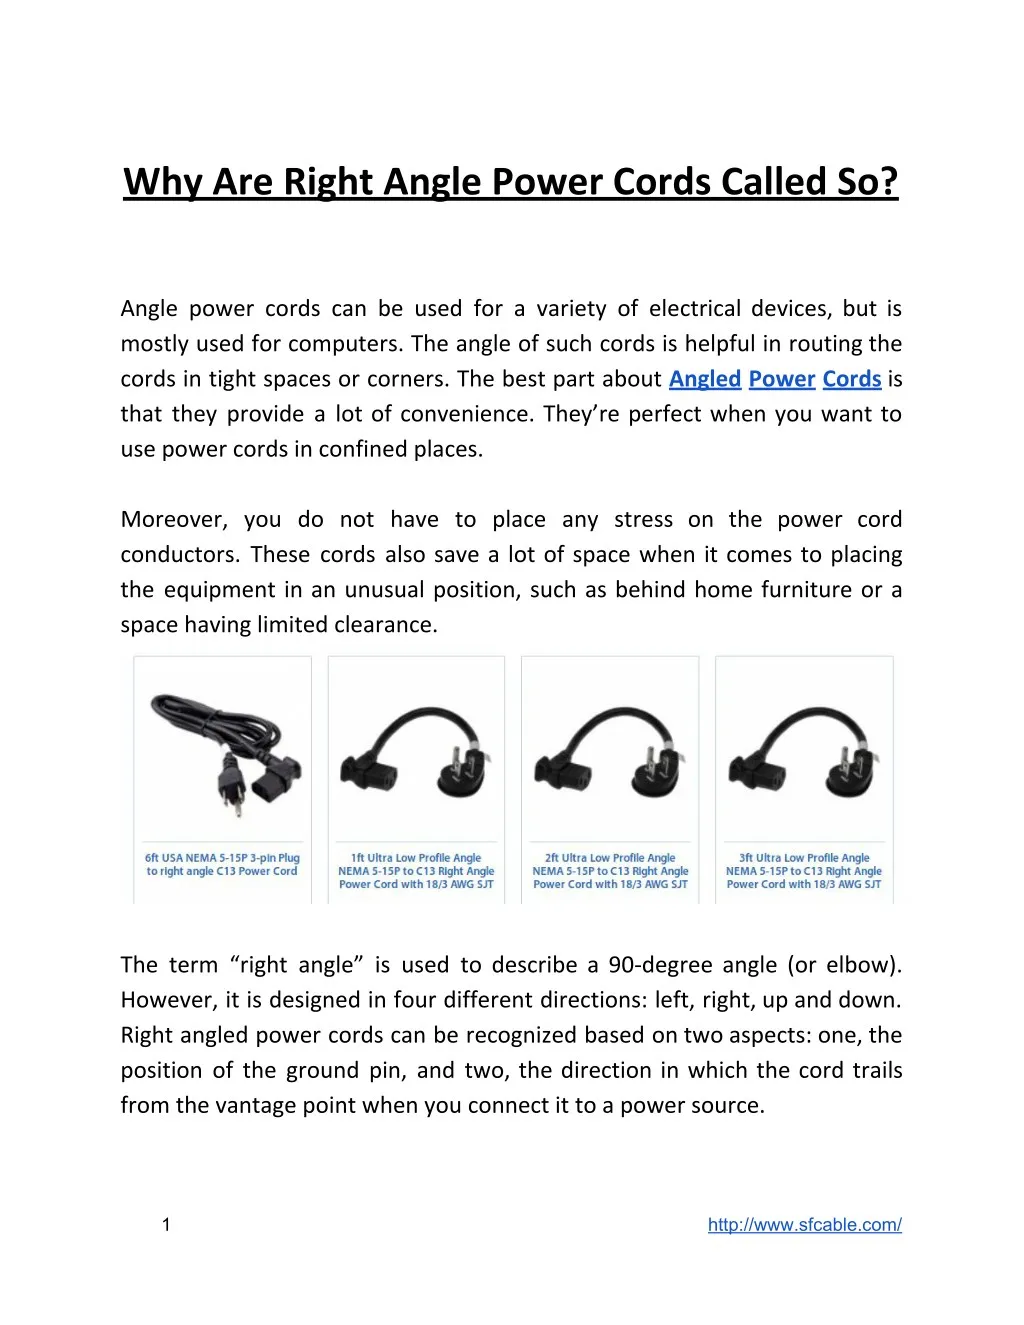 why are right angle power cords called so